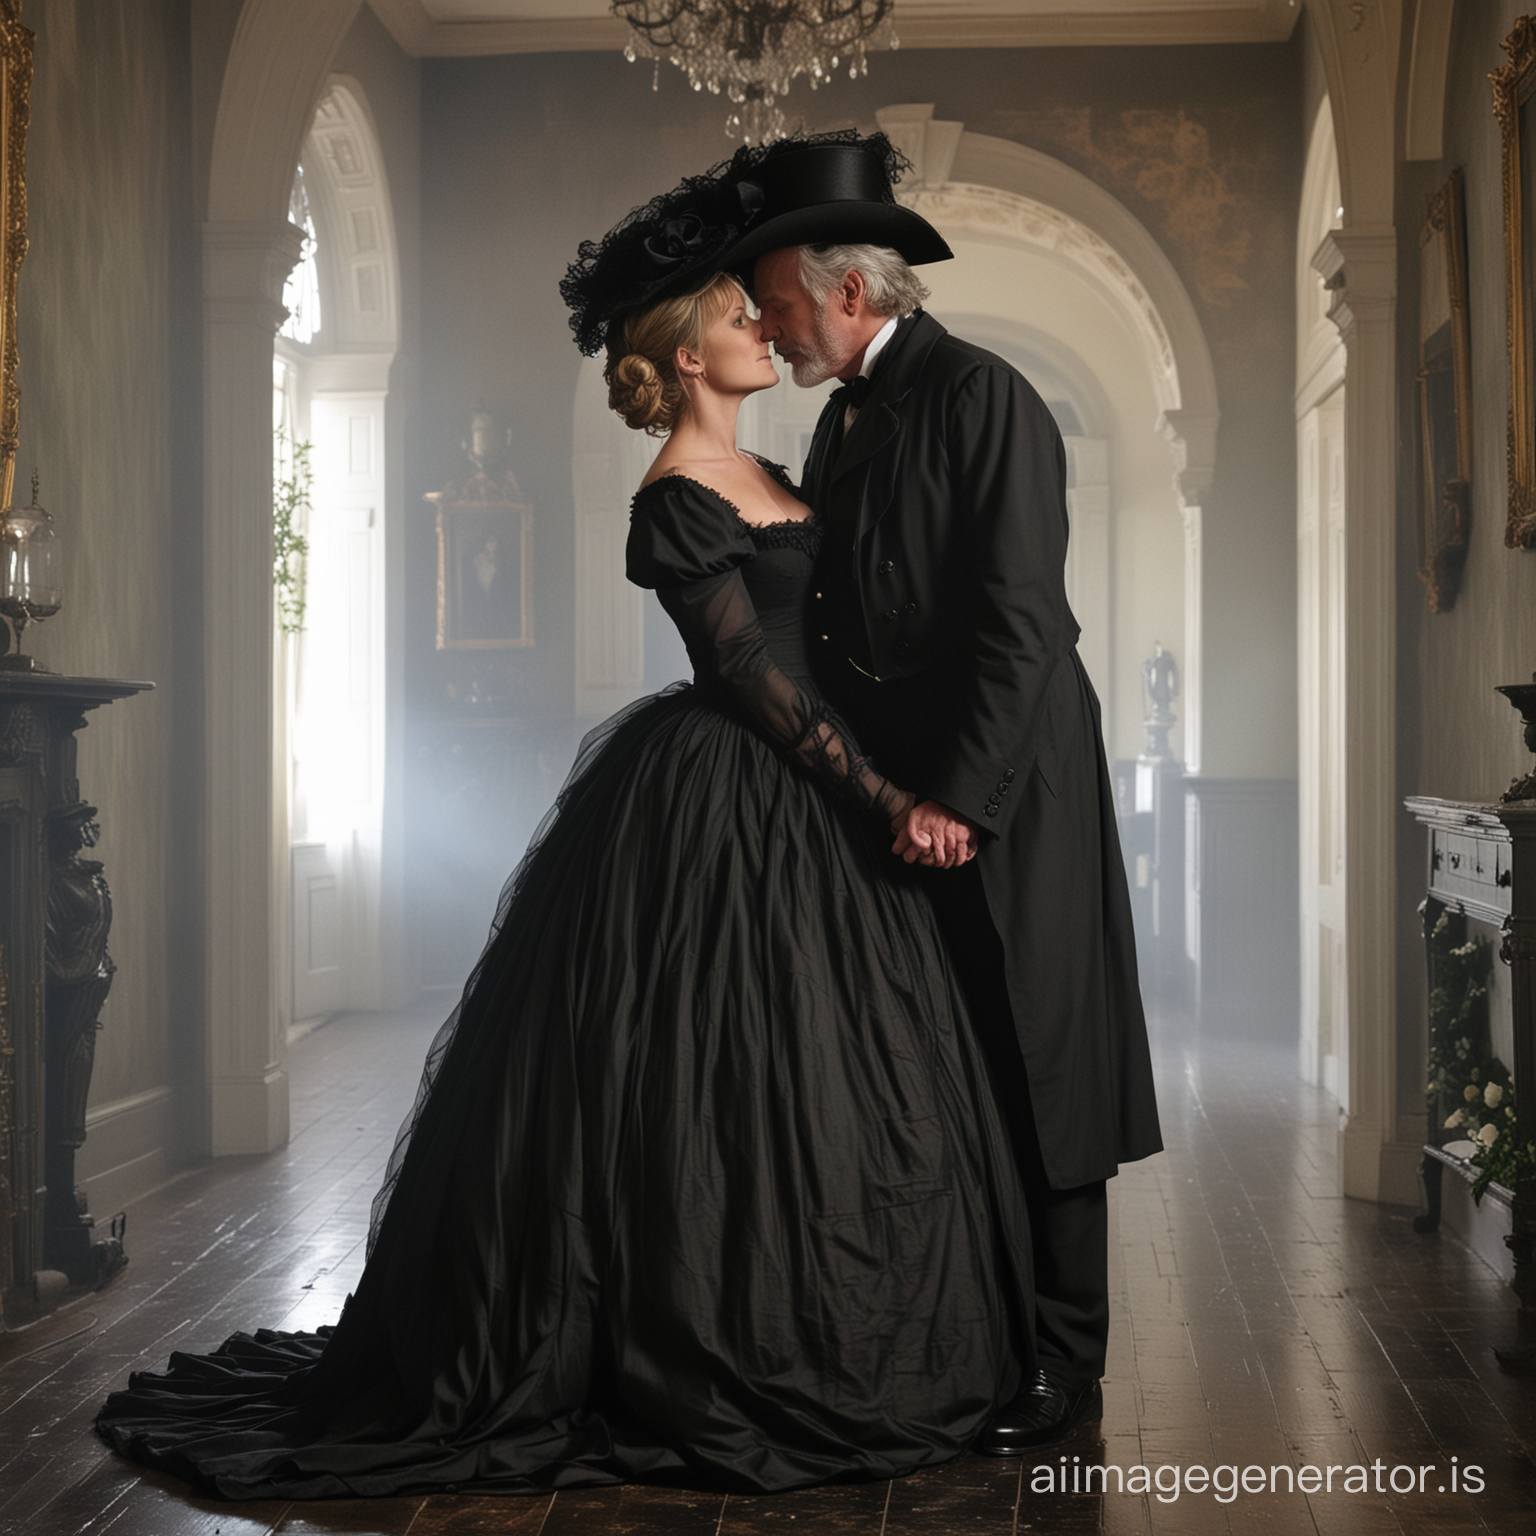 Amanda Tapping as Major Samantha Carter wearing a black floor-length loose billowing 1860 Victorian crinoline poofy dress with a frilly bonnet in a Victorian era mansion kissing passionetely an old man dressed into a black Victorian suit who seems to be her newlywed husband